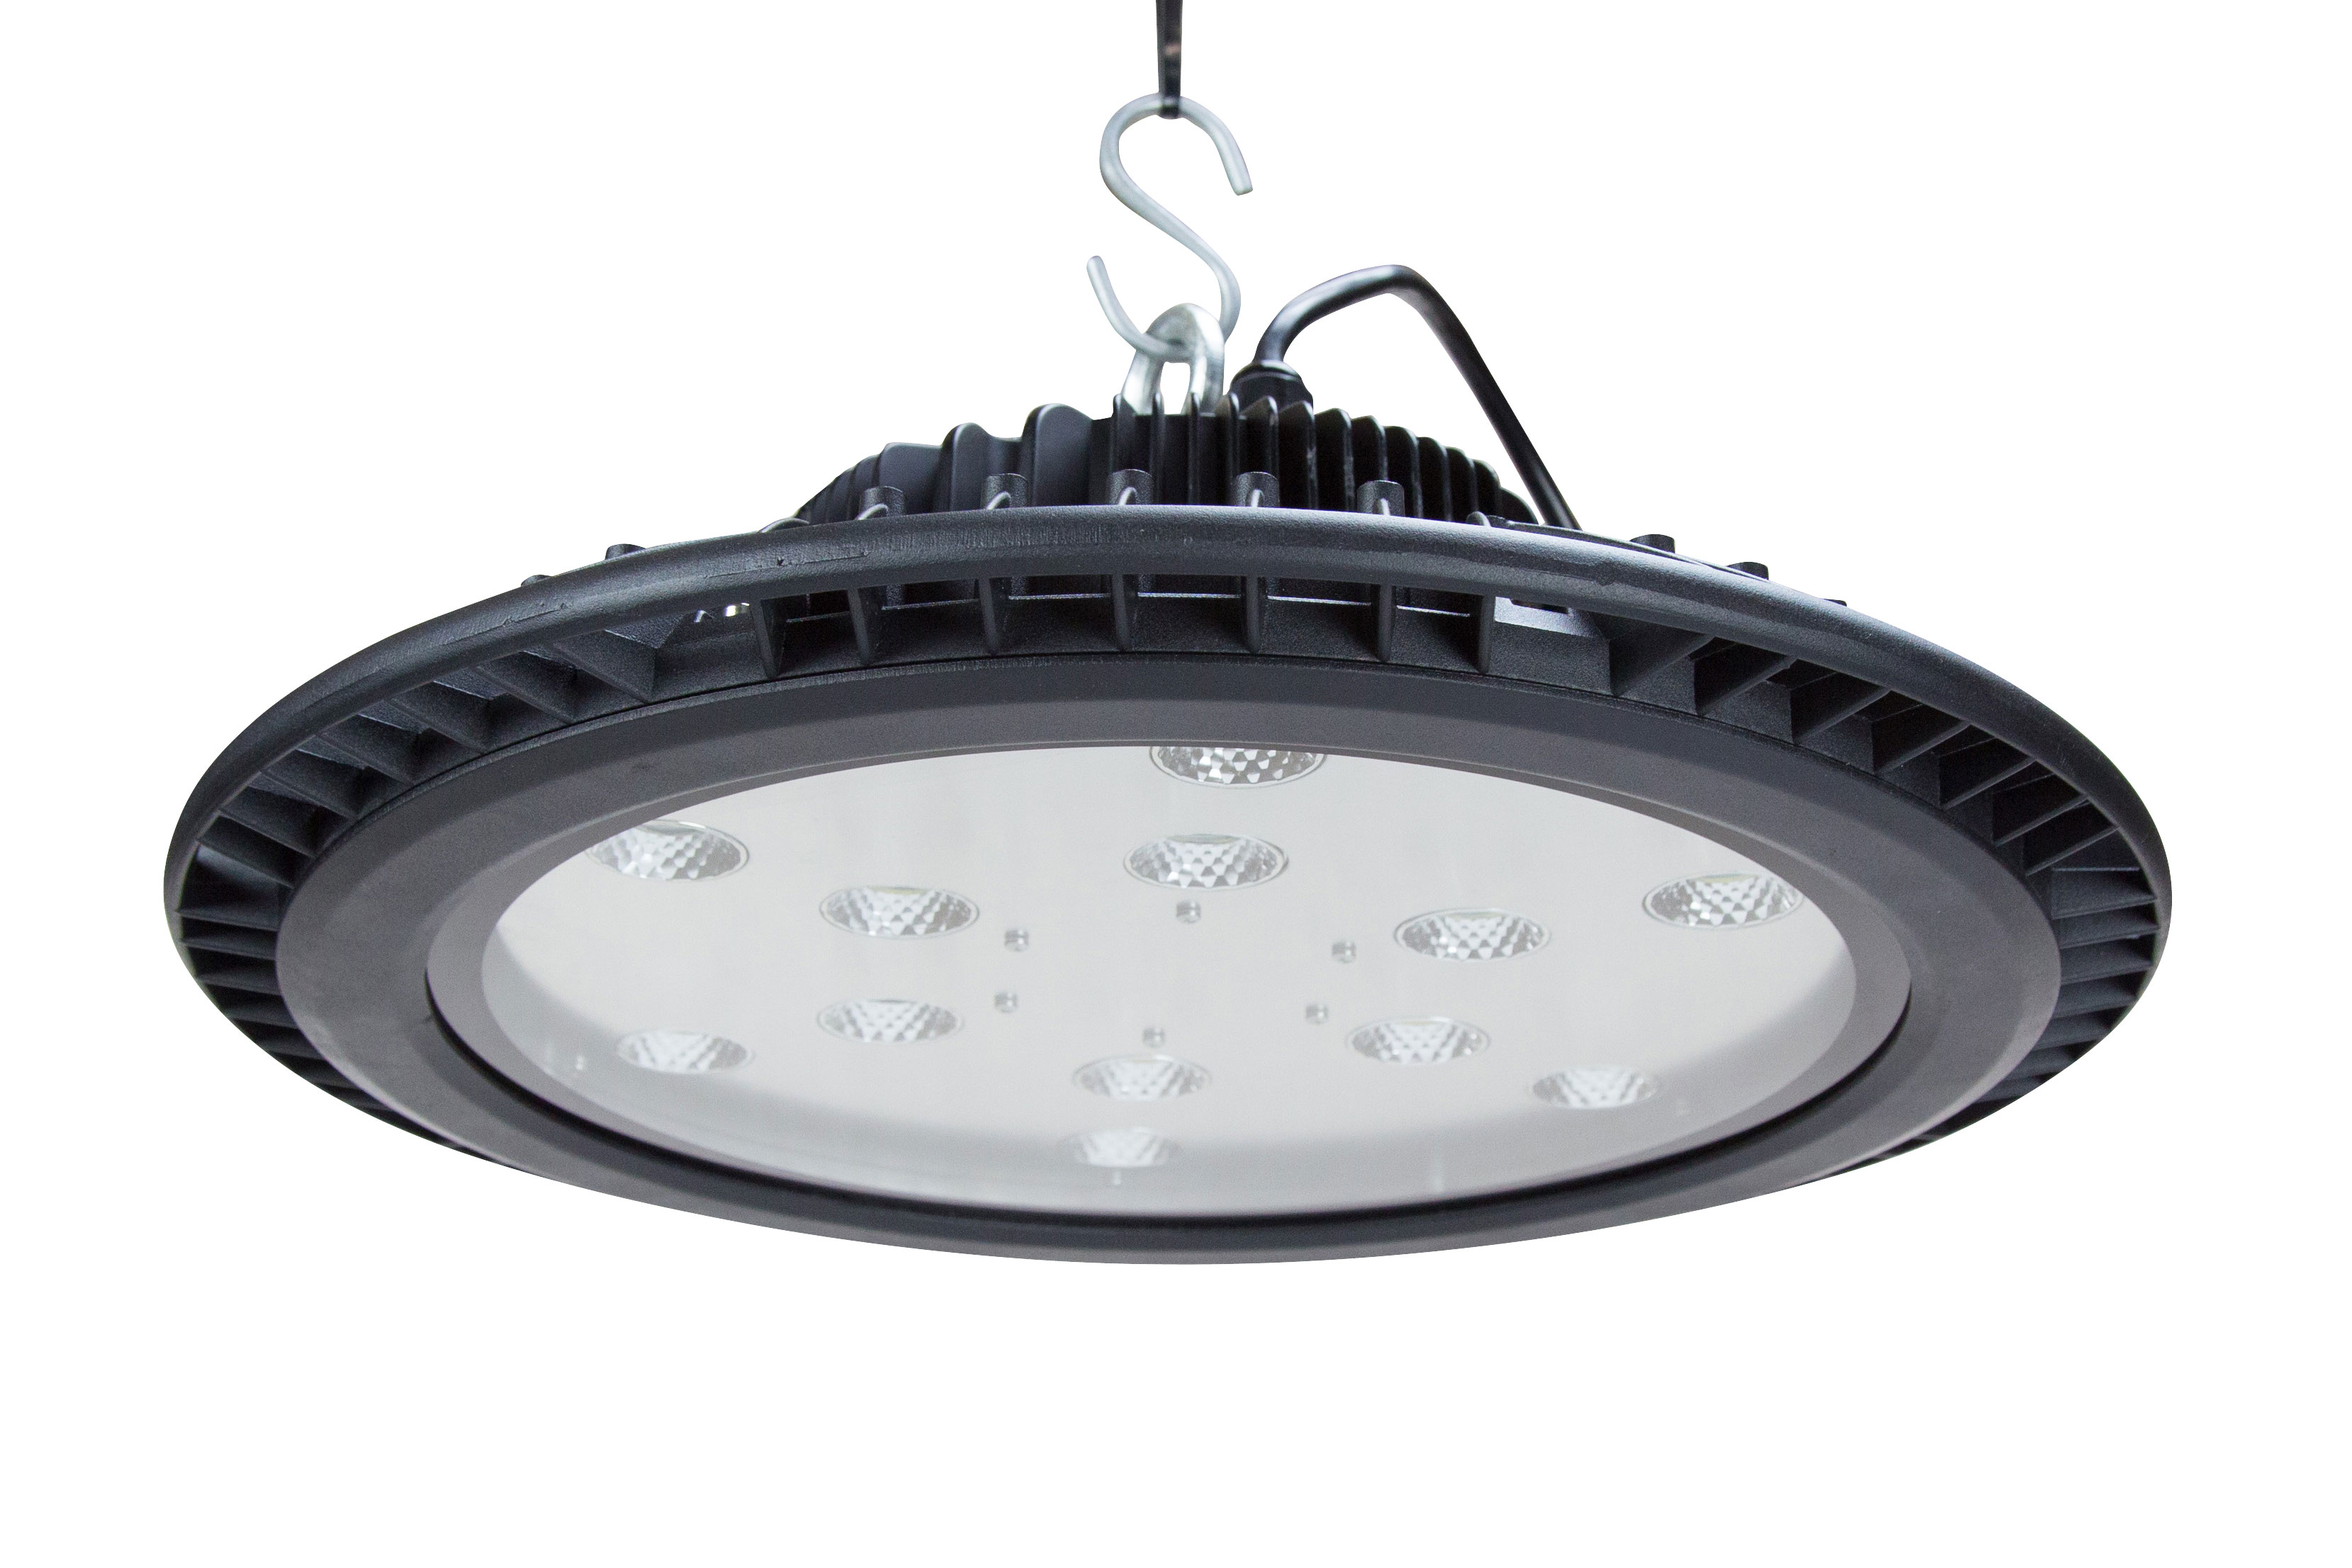 larson-electronics-releases-a-new-200-watt-general-area-high-bay-led